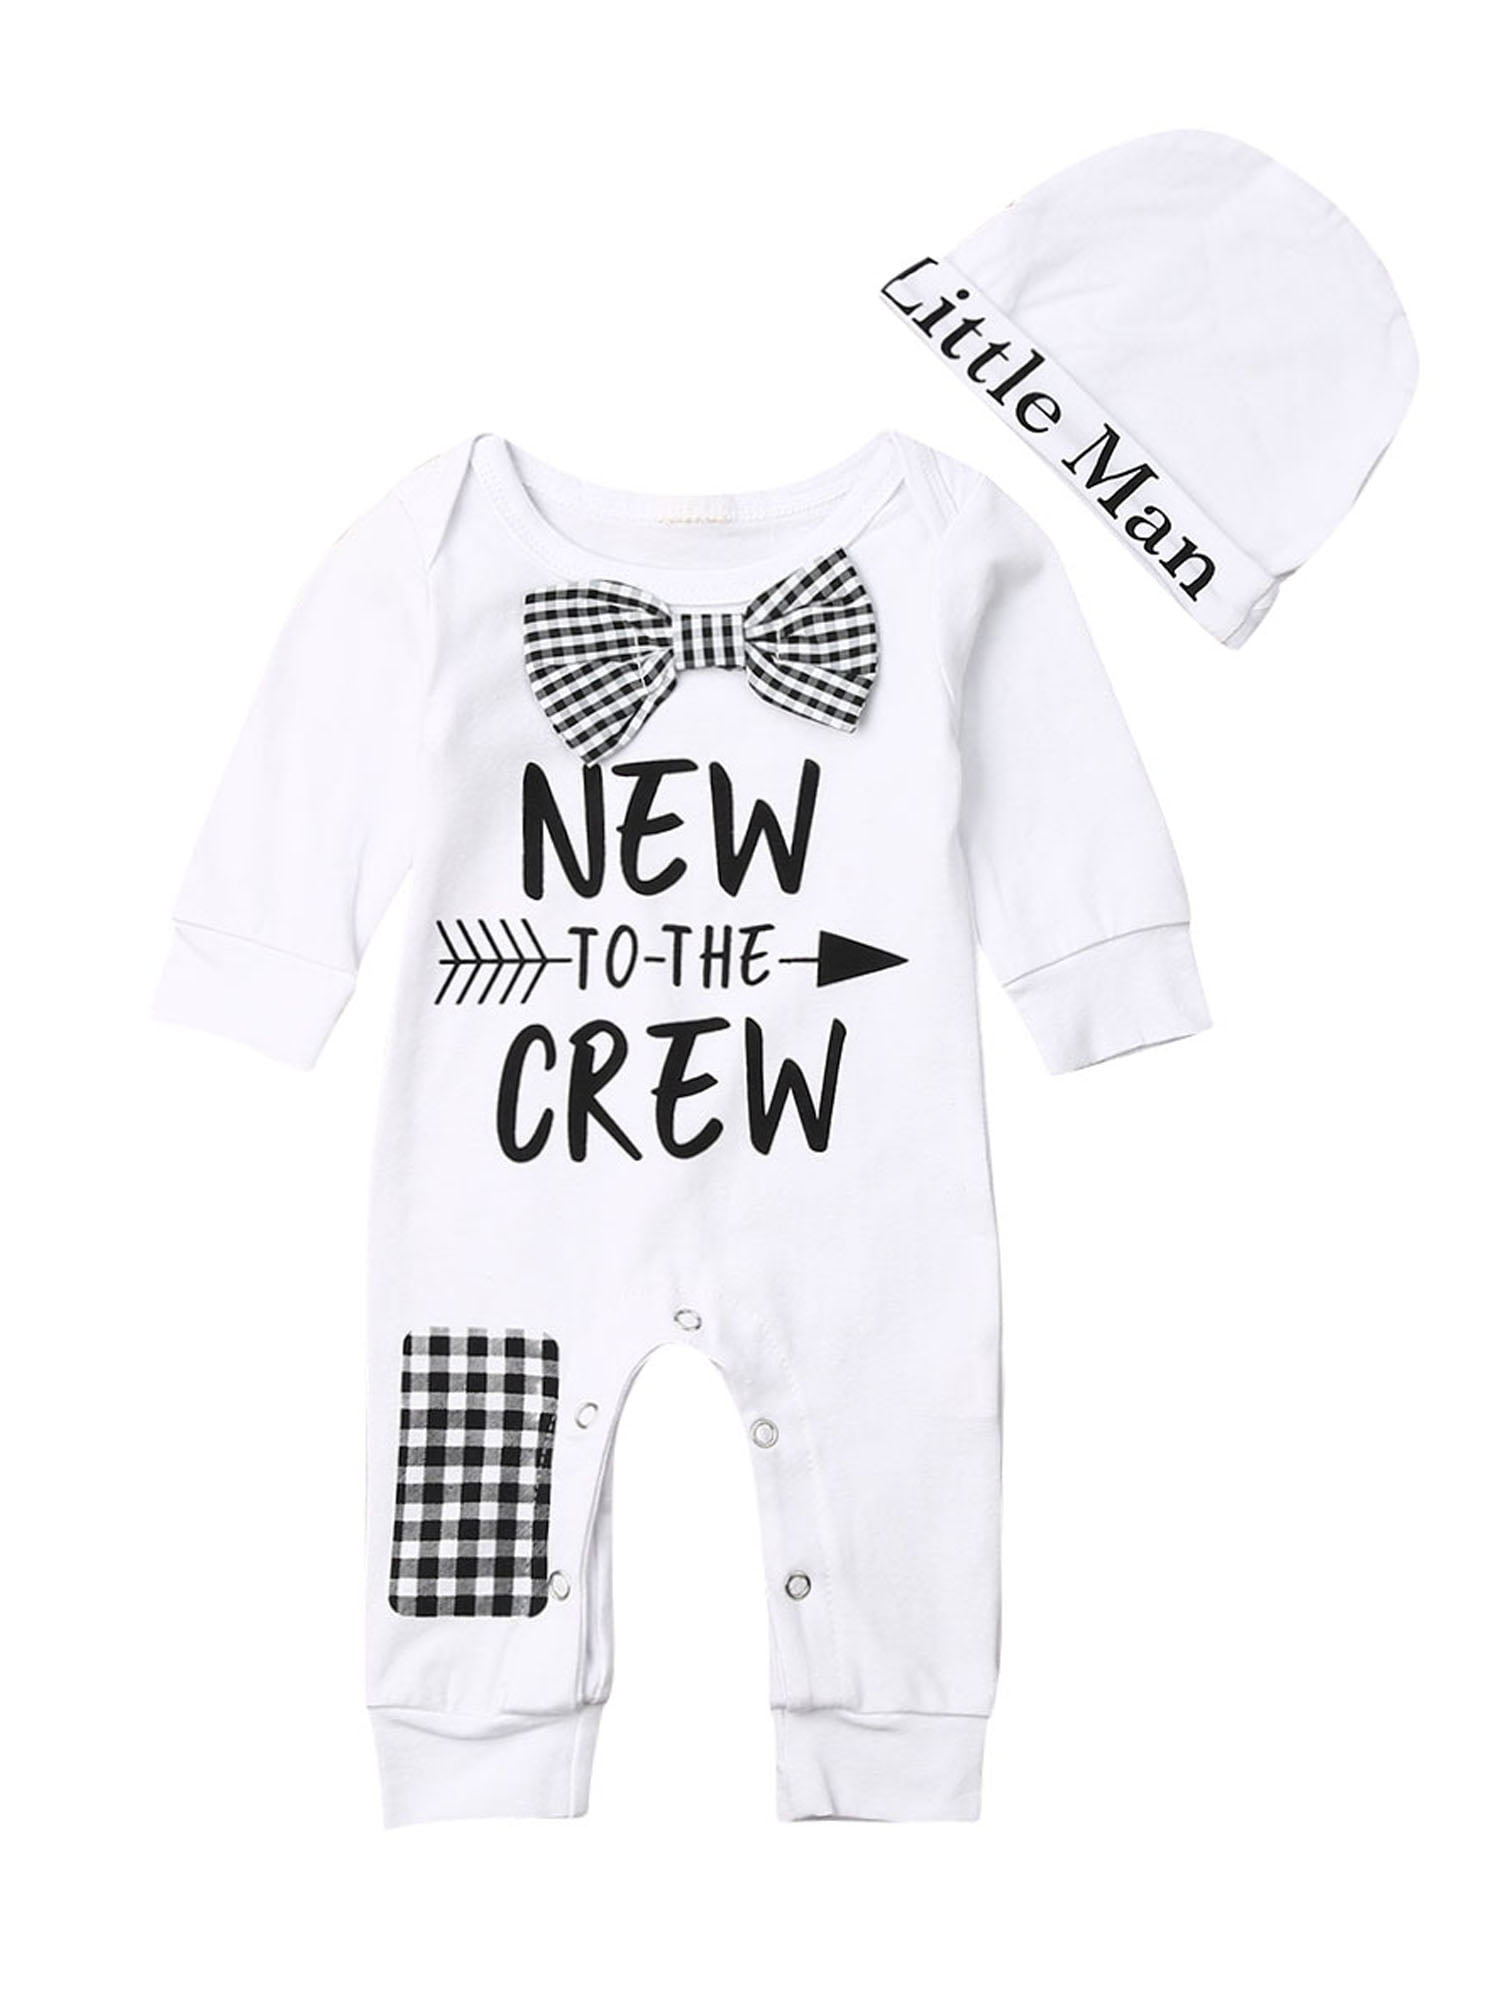 Details about   2PCS Newborn Infant Baby Cotton Knitted Sweater Romper Jumpsuit Outfit+Hat Set 